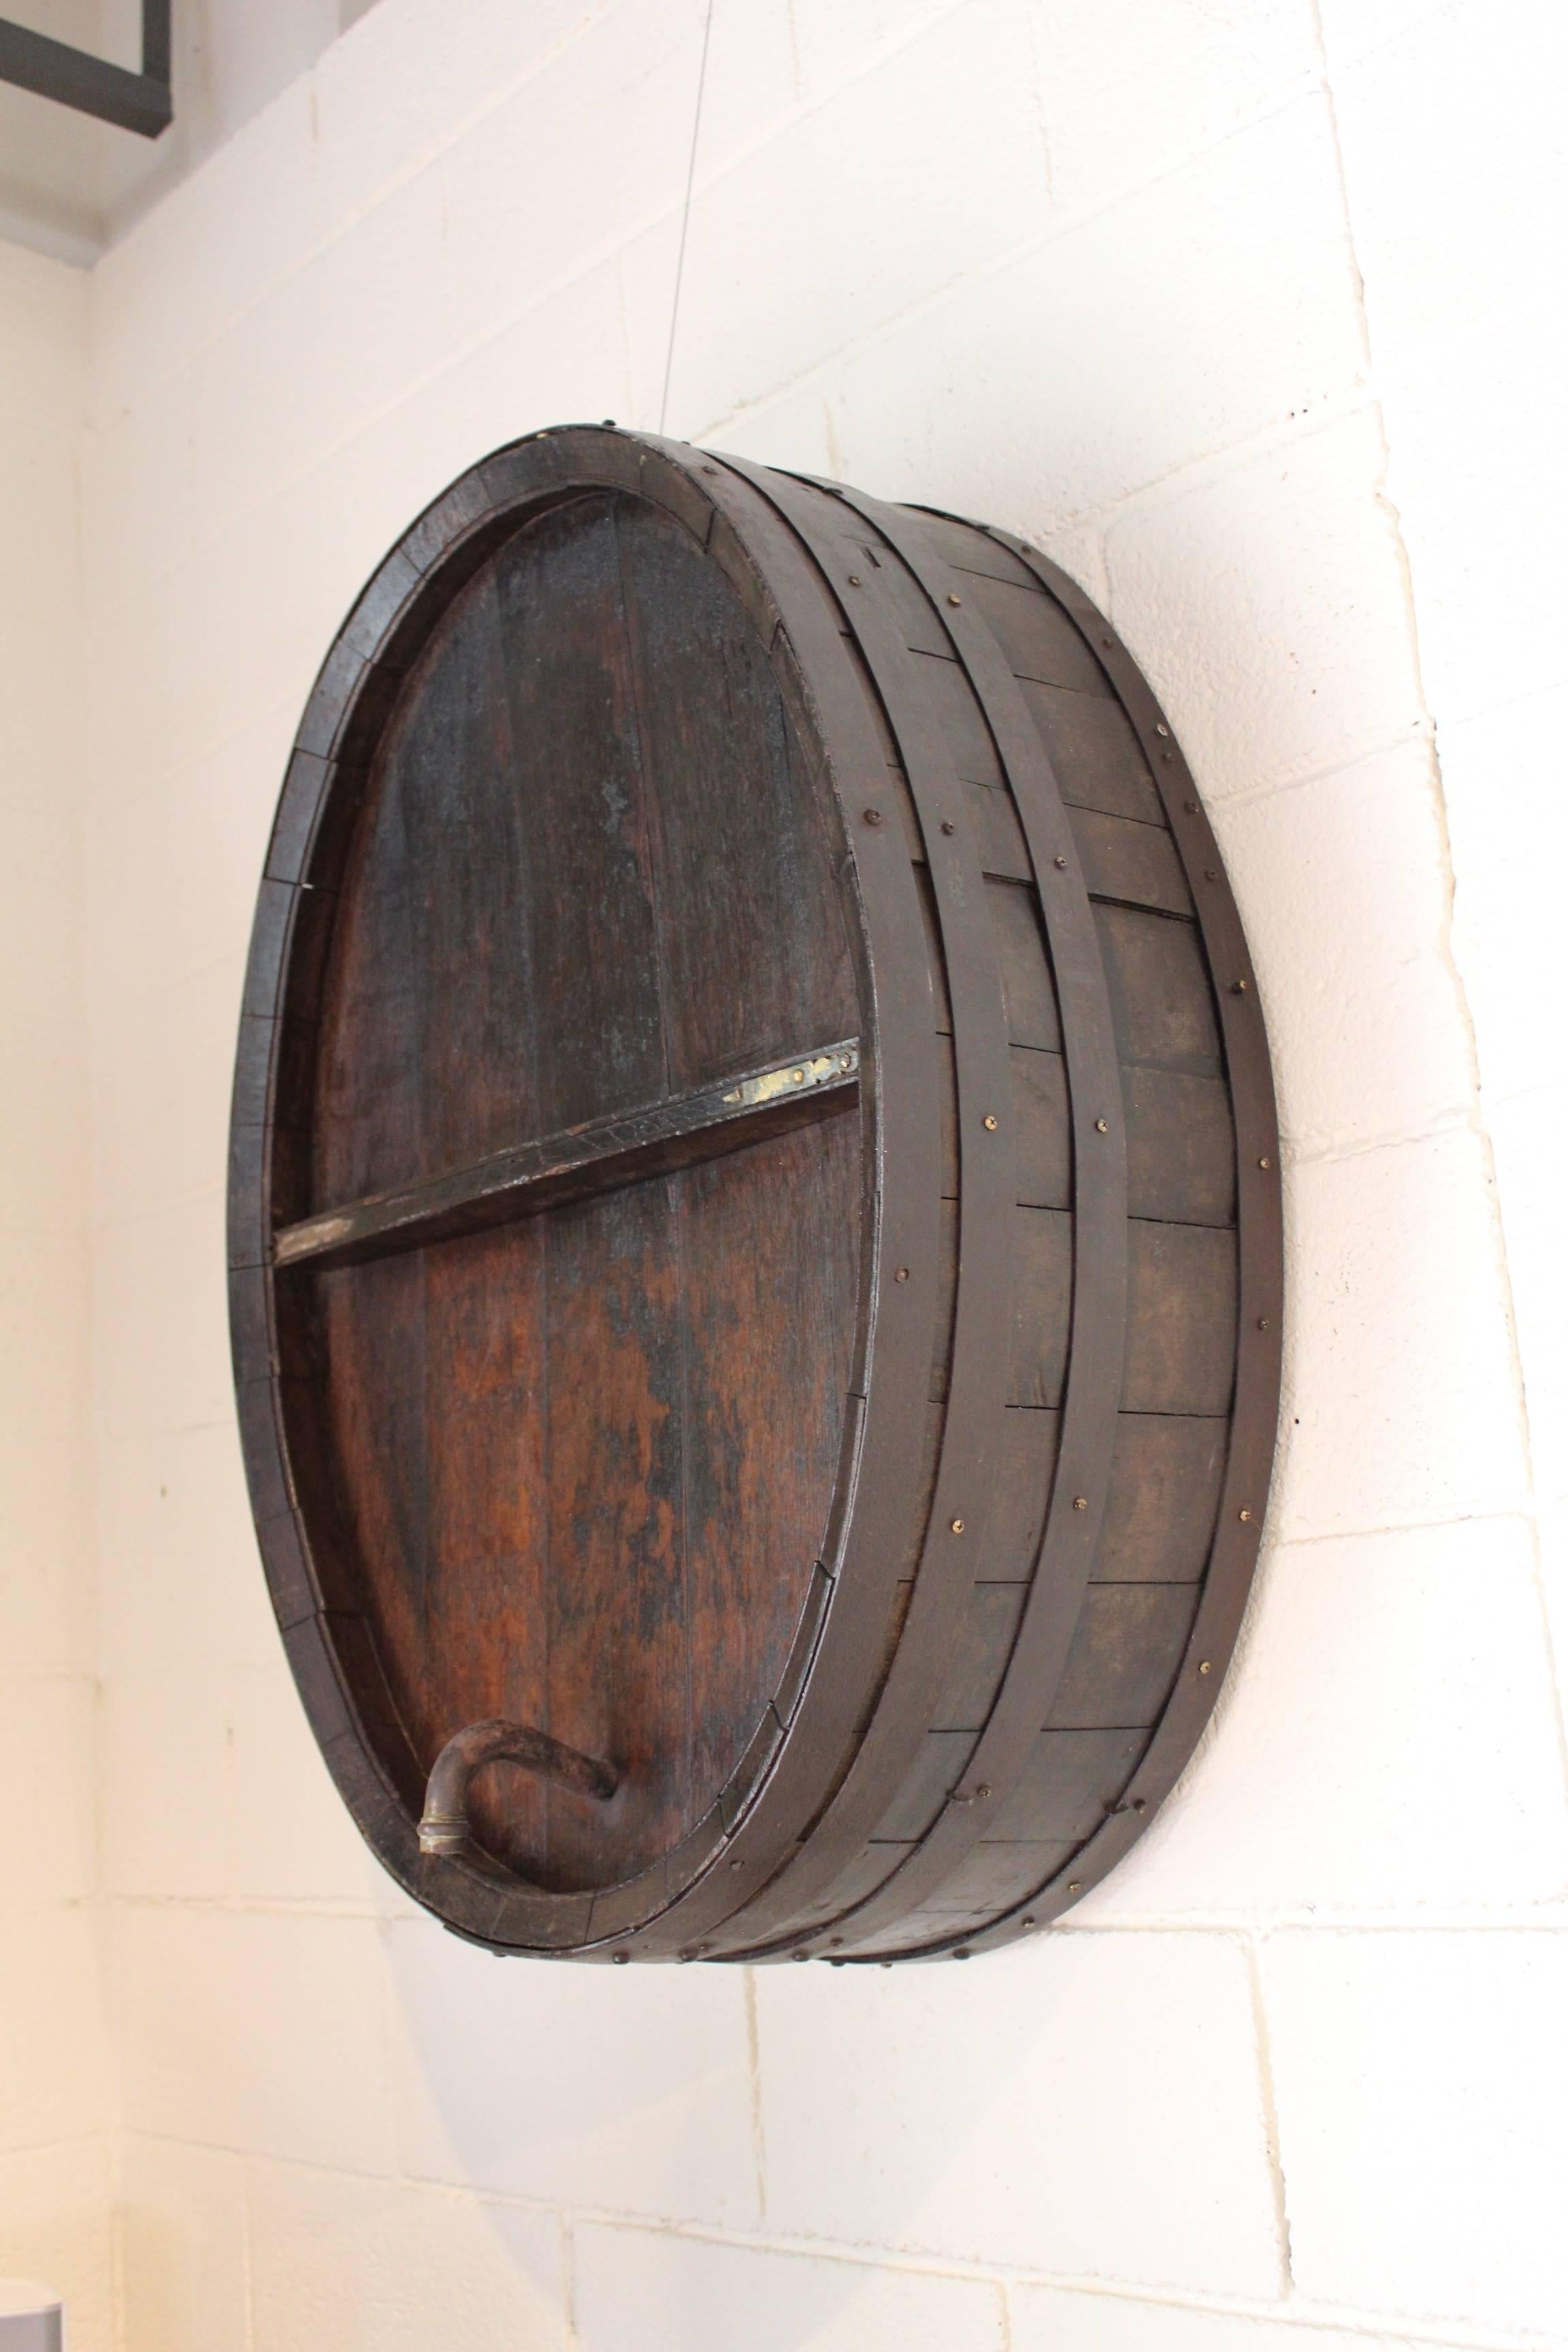 Rustic Antique French Iron Banded Wine Barrel as Wall Decor, circa 1900